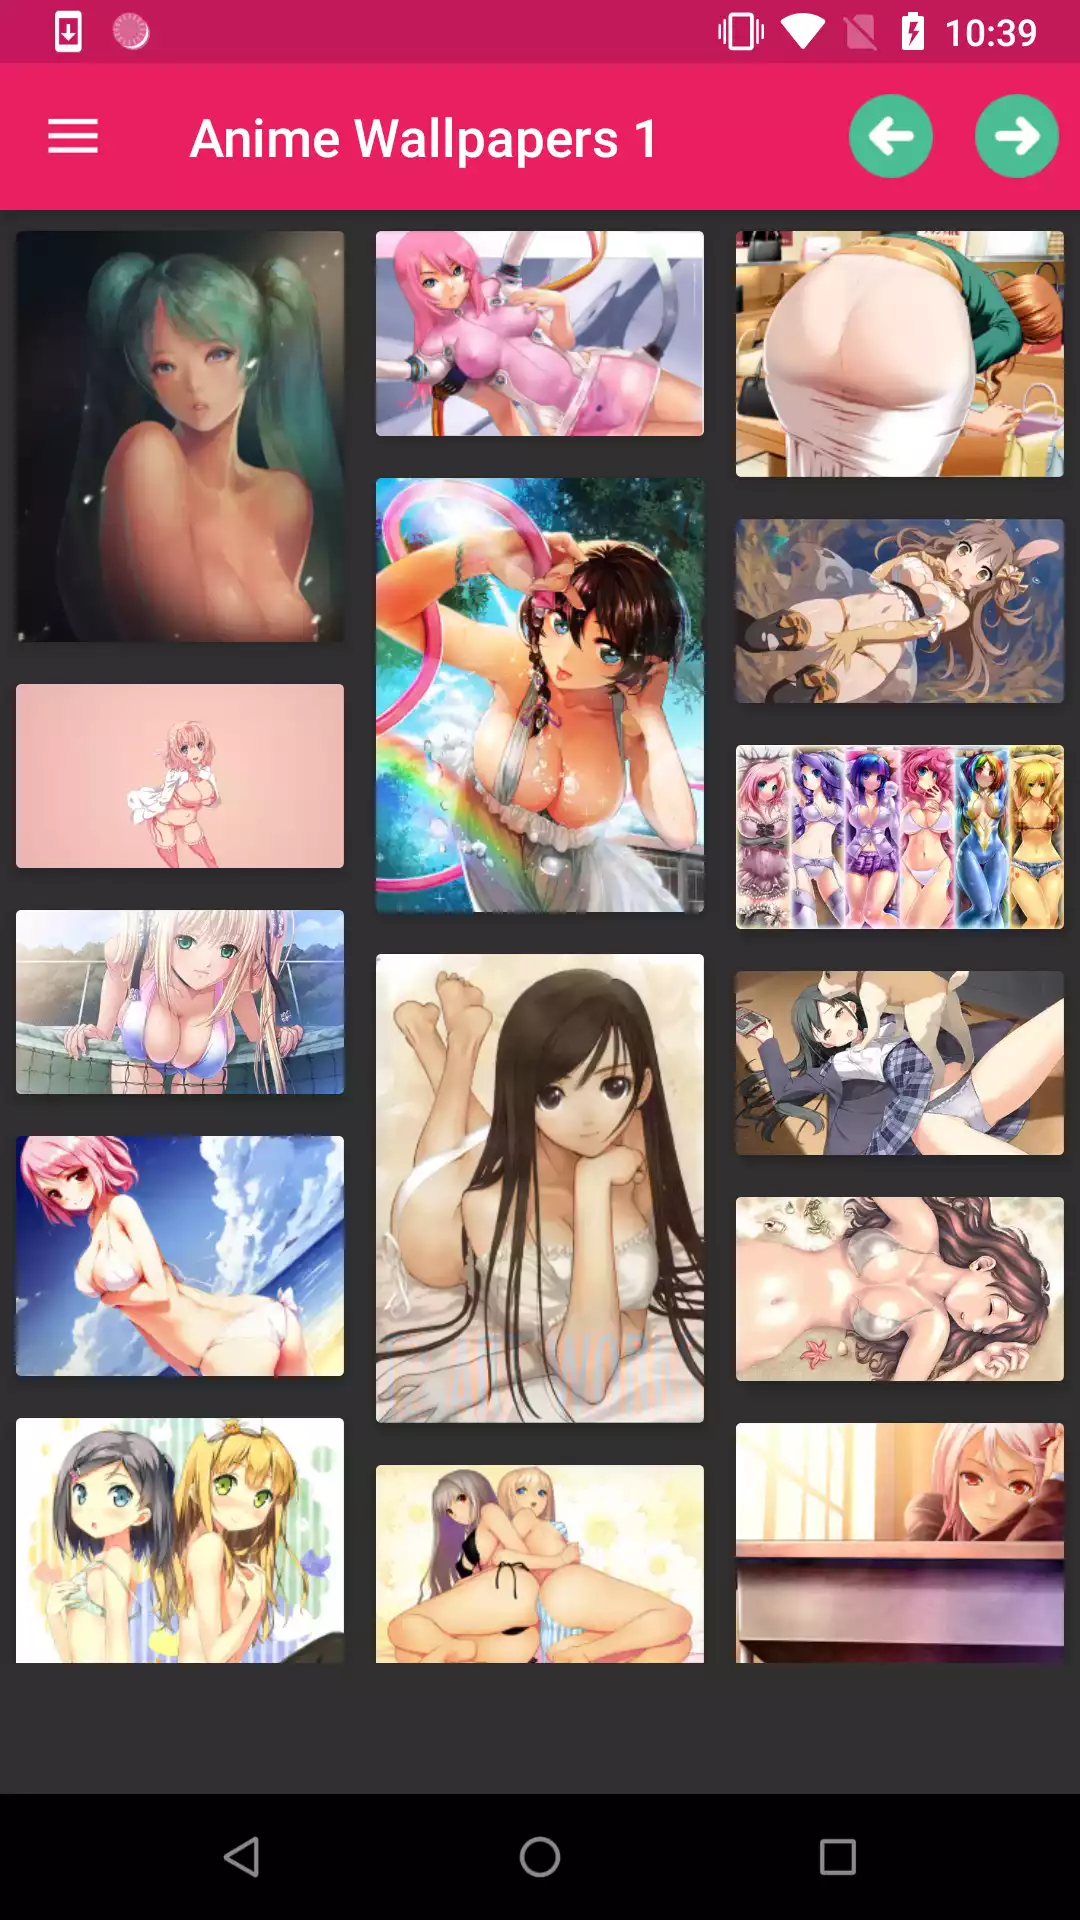 Sexy Anime Girls Wallpapers hentai,sissy,henta,henti,apk,gallary,porn,anime,pic,backgrounds,sexy,adult,pics,apps,hot,photo,pornstar,xxx,pictures,girls,wallpapers,download,image,app,android